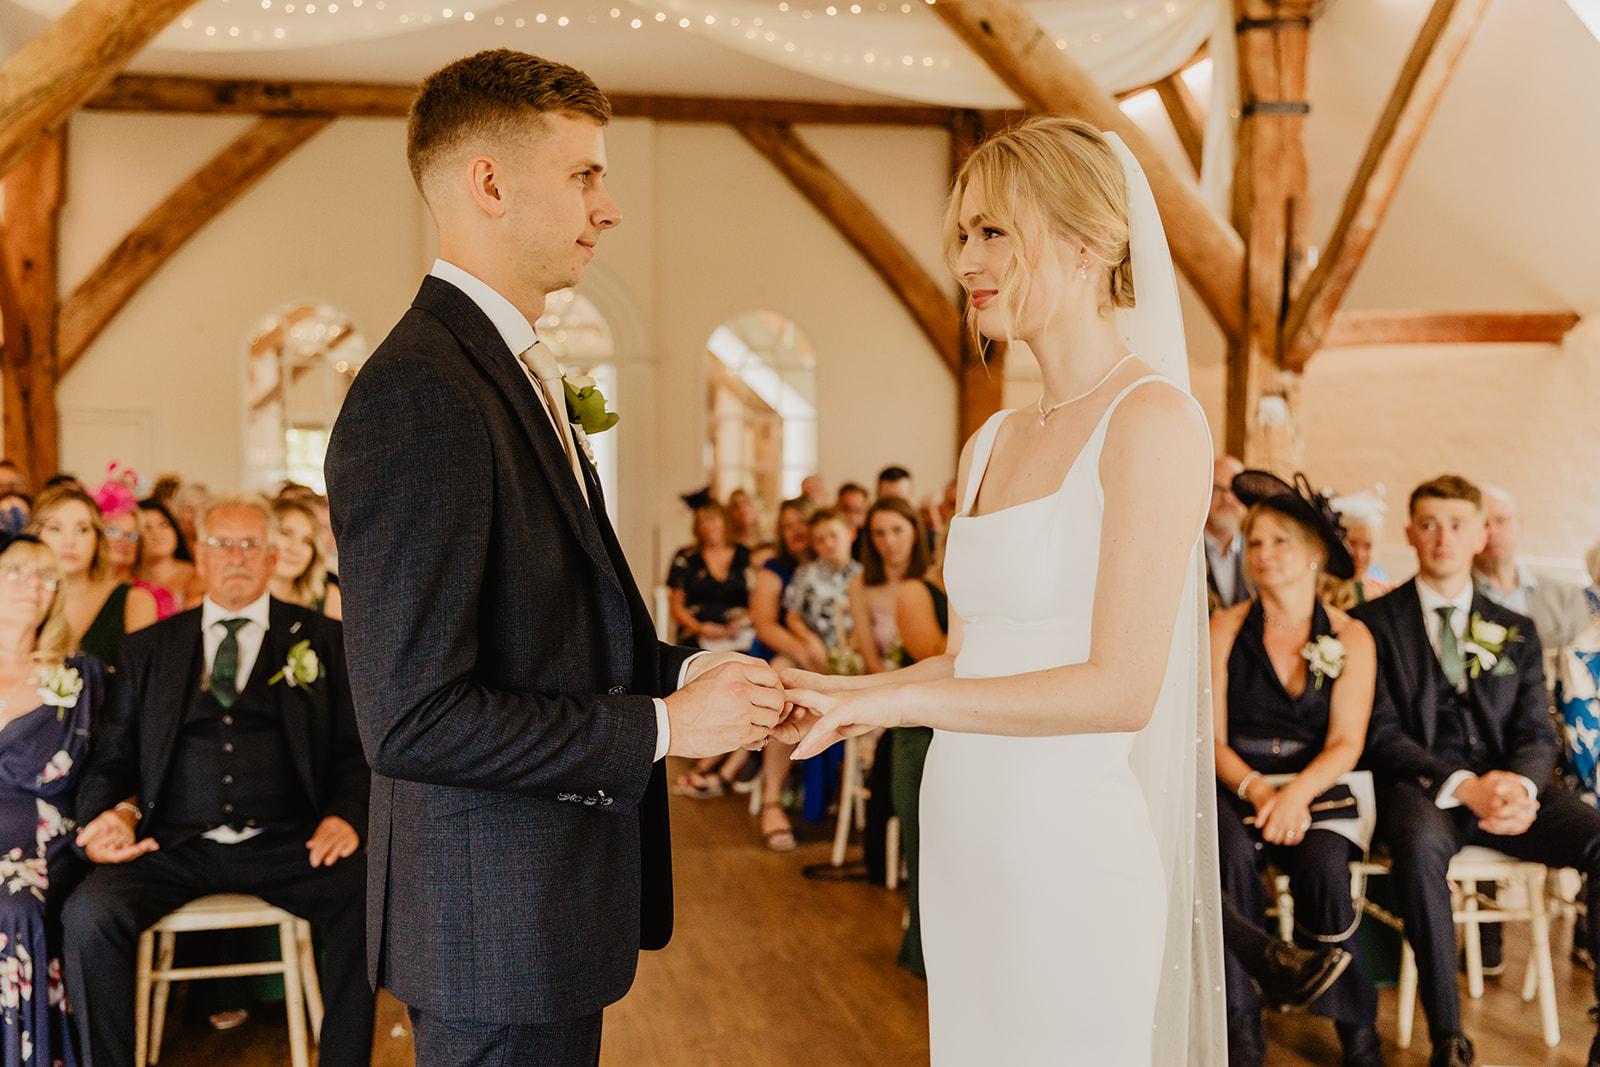 Bride and groom during ceremony at a Bury Manor Barn Wedding in Sussex. Photographer OliveJoy Photography.